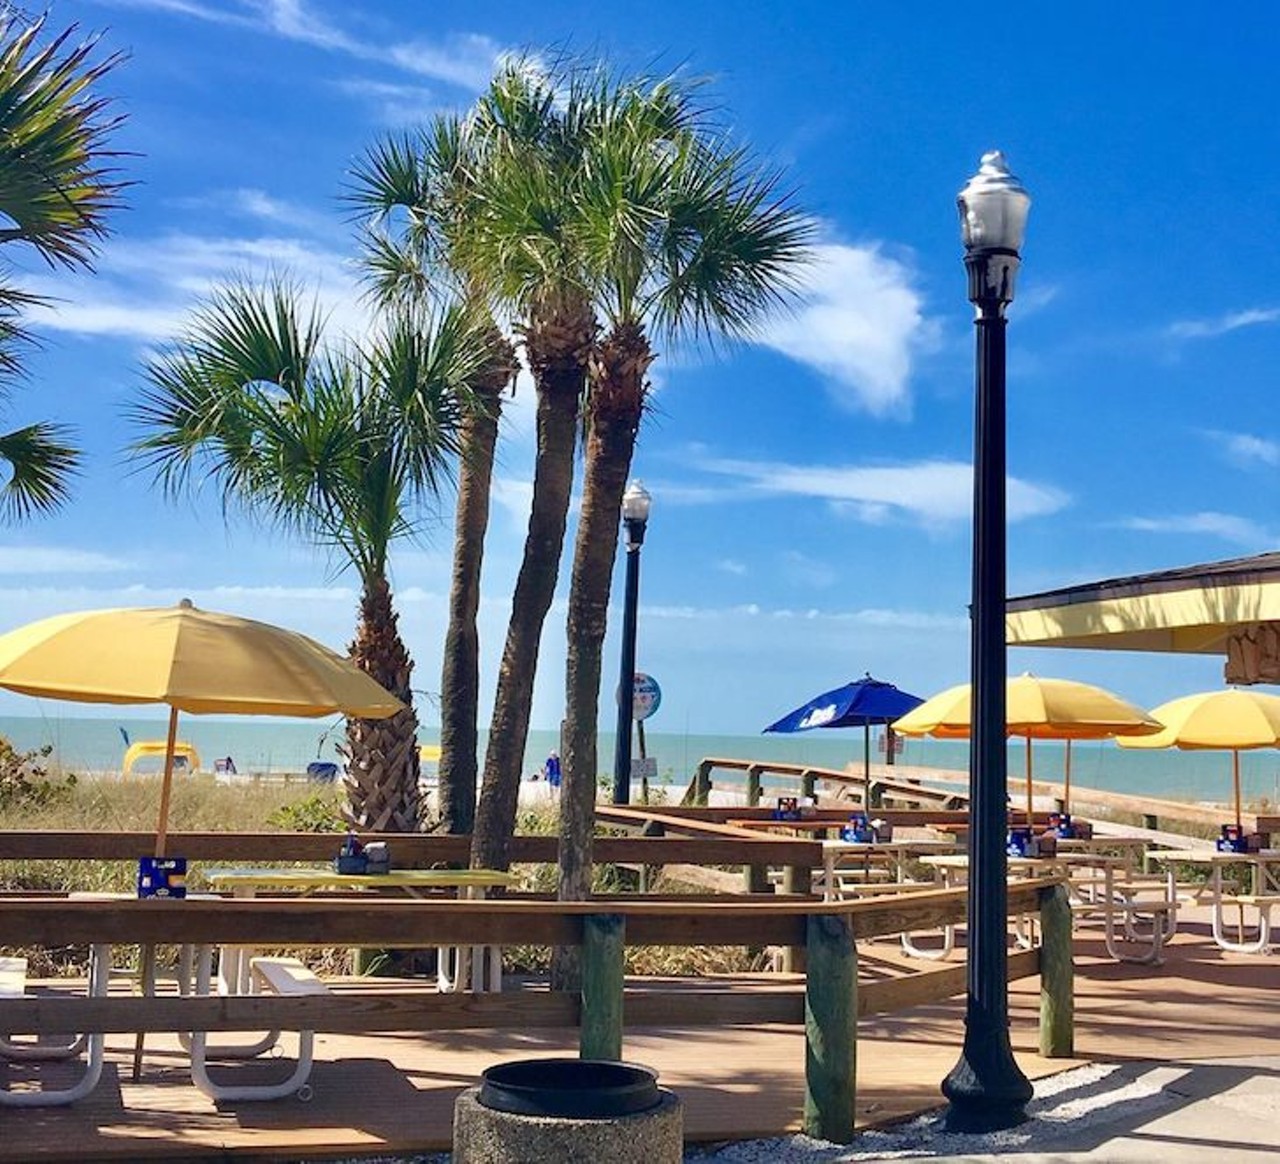 Paradise Grille at Upham Beach  
6850 Beach Plaza, Tampa, 727-560-5399
Paradise Grille is so good they created two! Visit the Upham Beach location to sit right on the sands edge.
Photo via Paradise Grille/Facebook